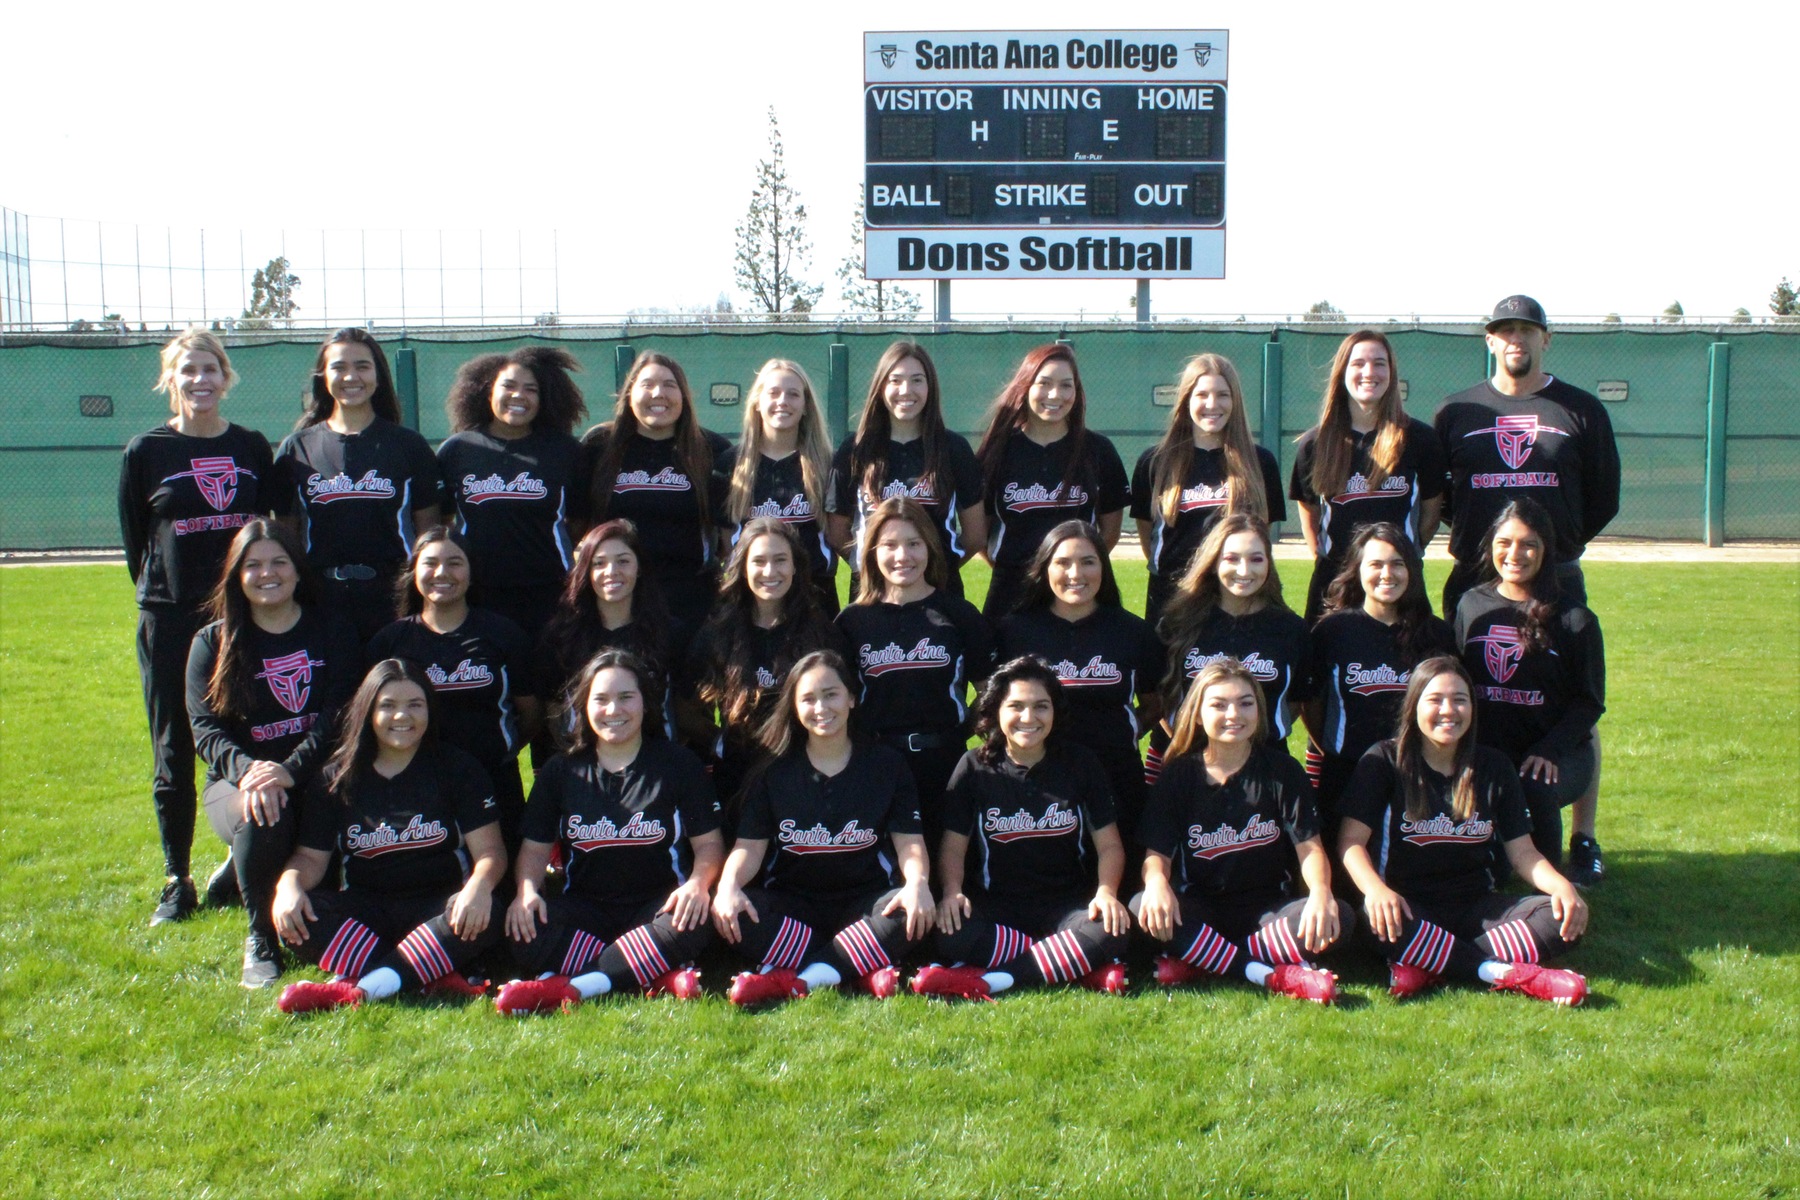 SAC Softball Seeded 11th, Will Travel to Antelope Valley for CCCAA Regional Playoffs